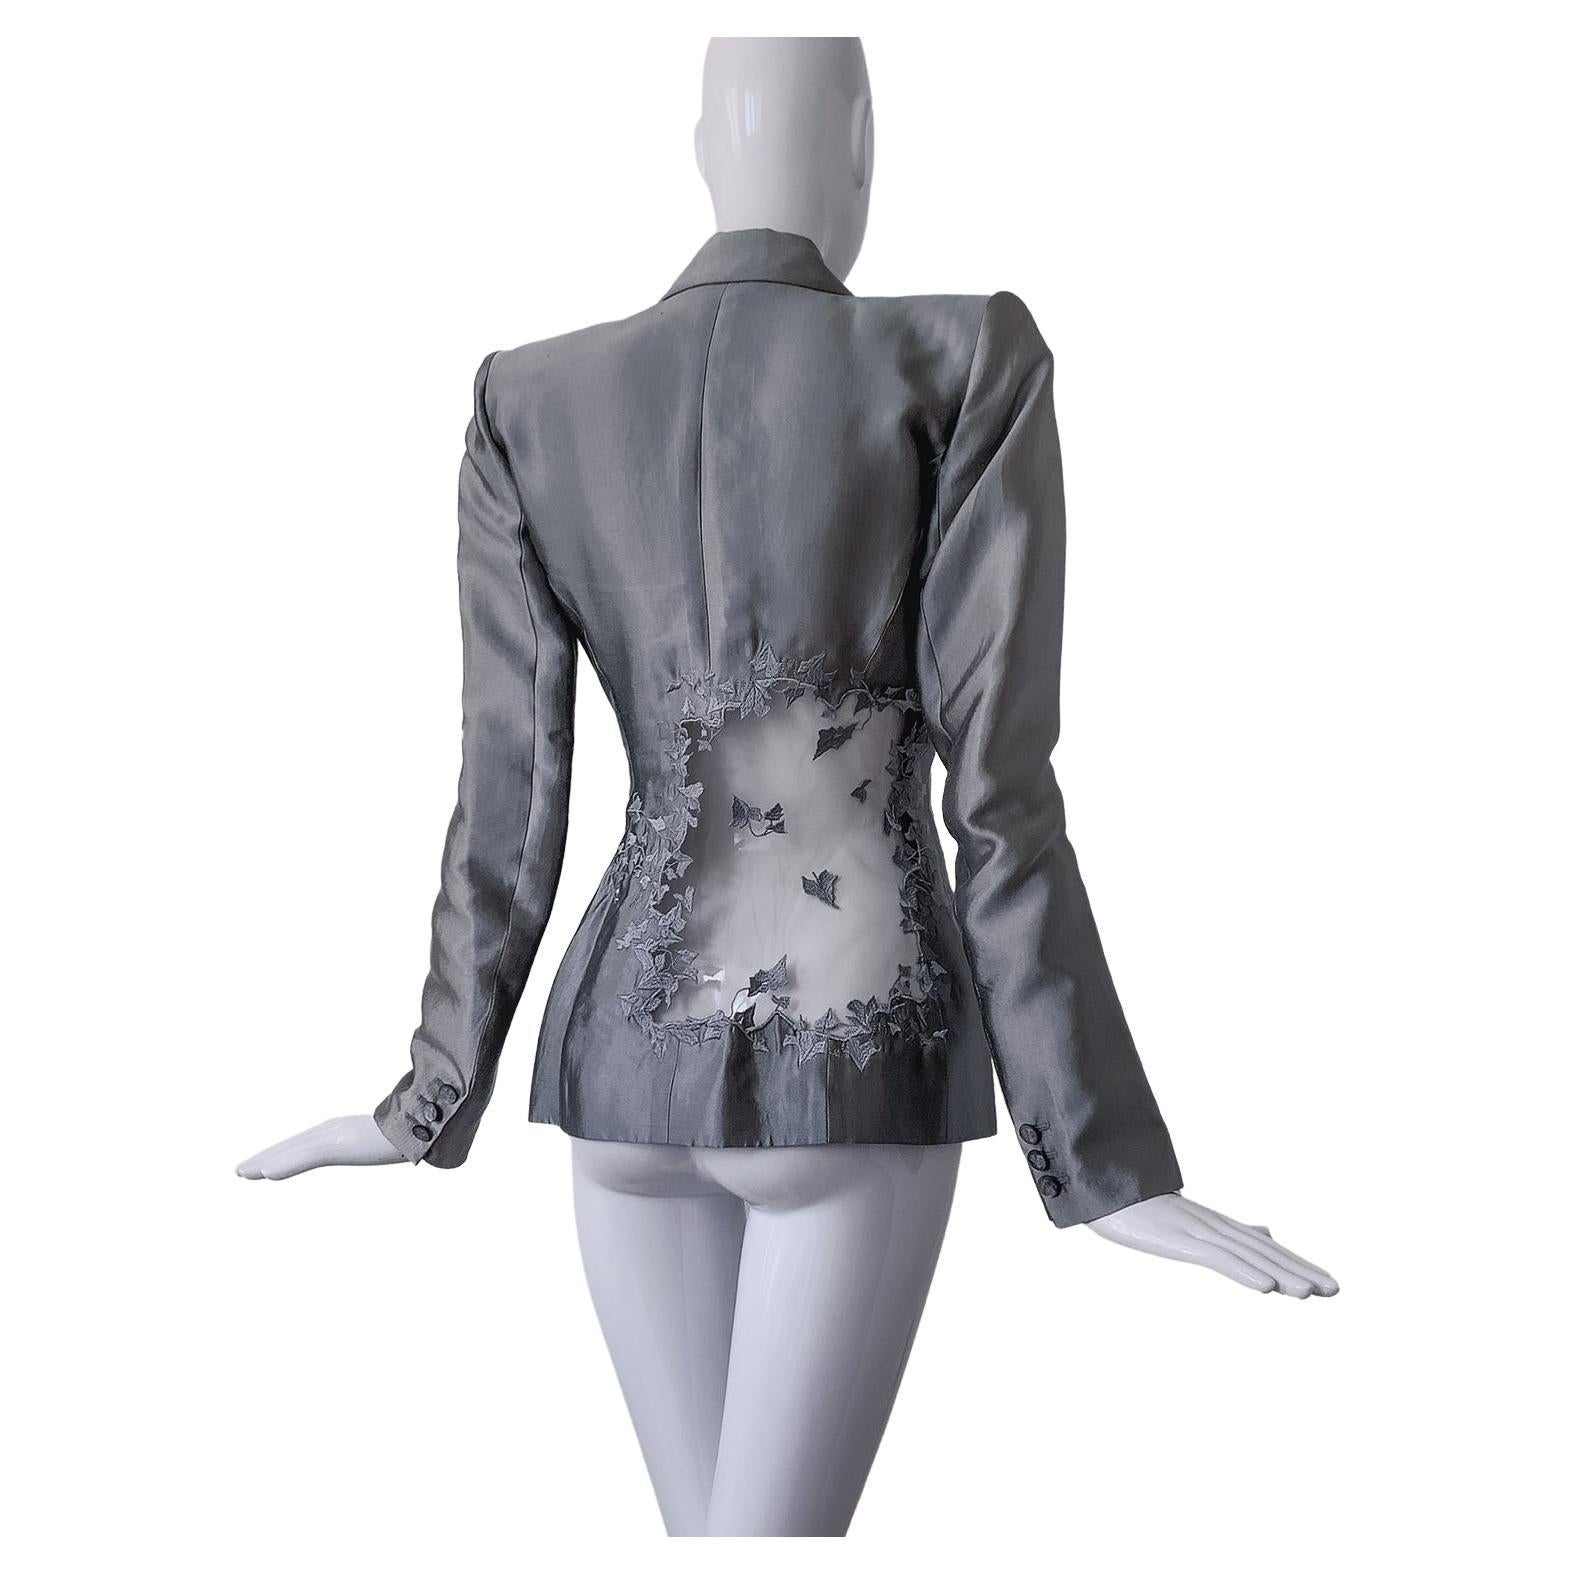 Alexander McQueen SS1999 Silver Silk Suit Blazer Embroidered Illusion Ivy Leaf  For Sale